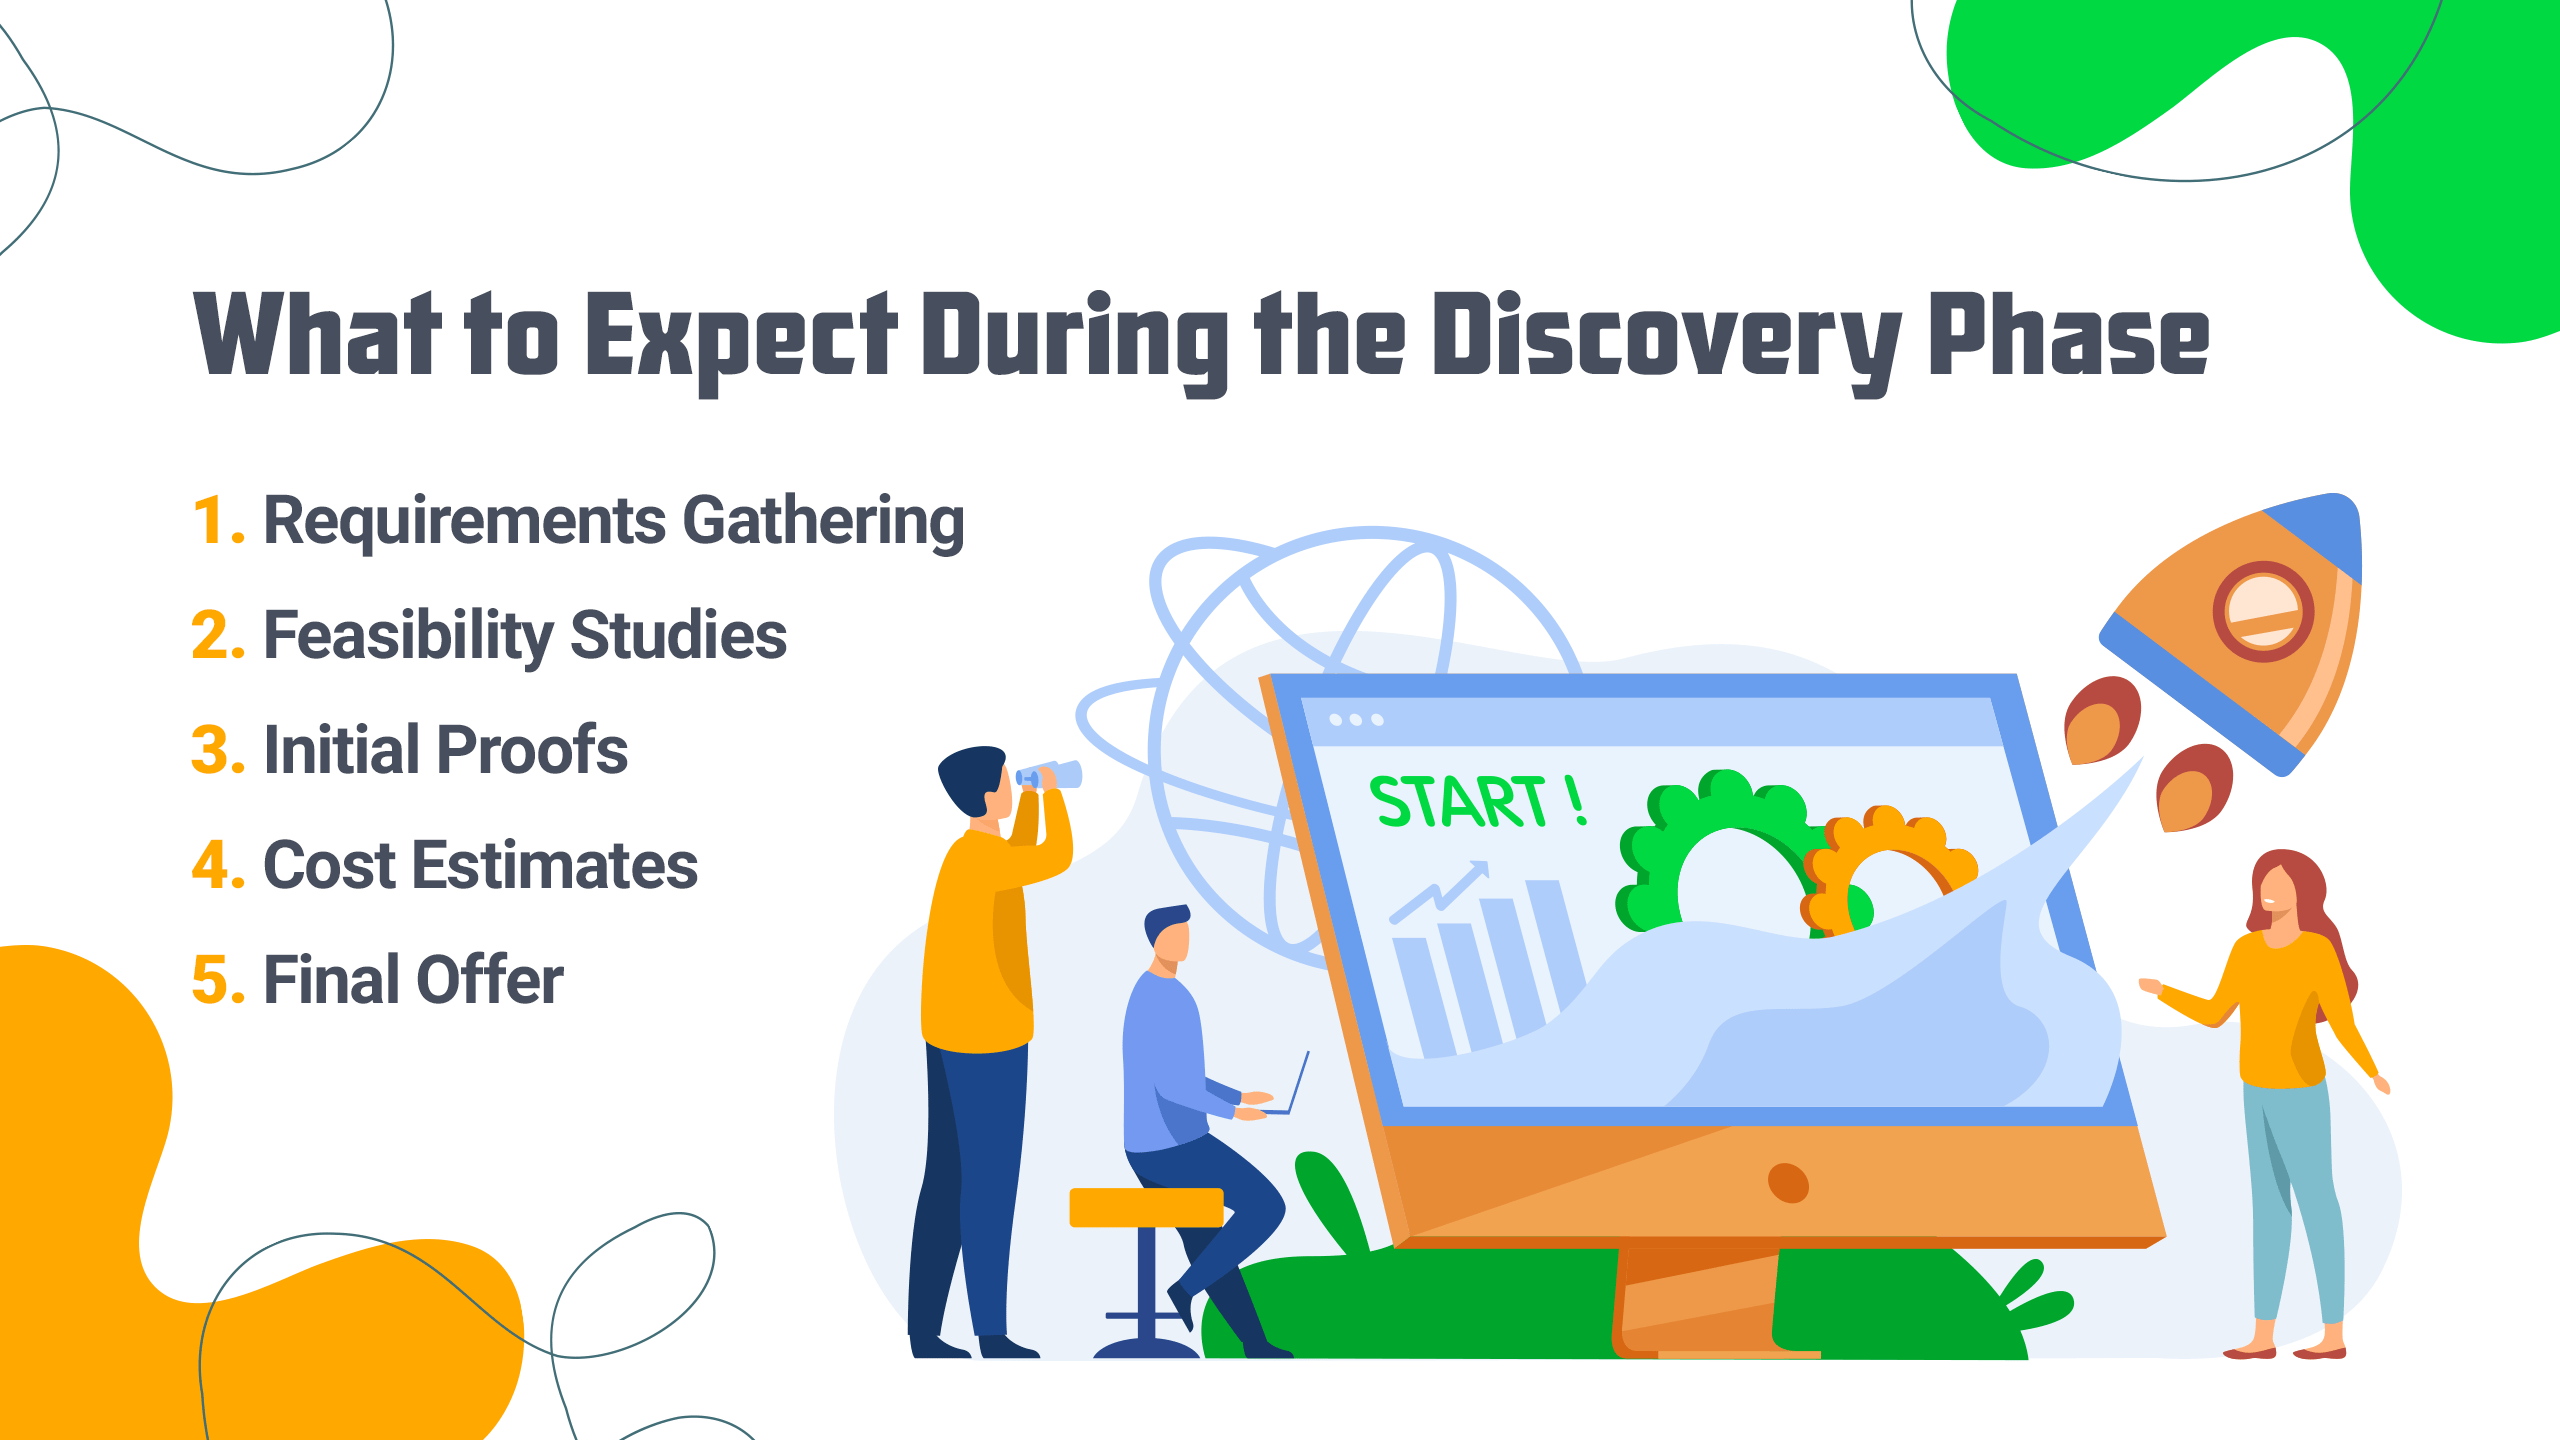 Expect During the Discovery Phase